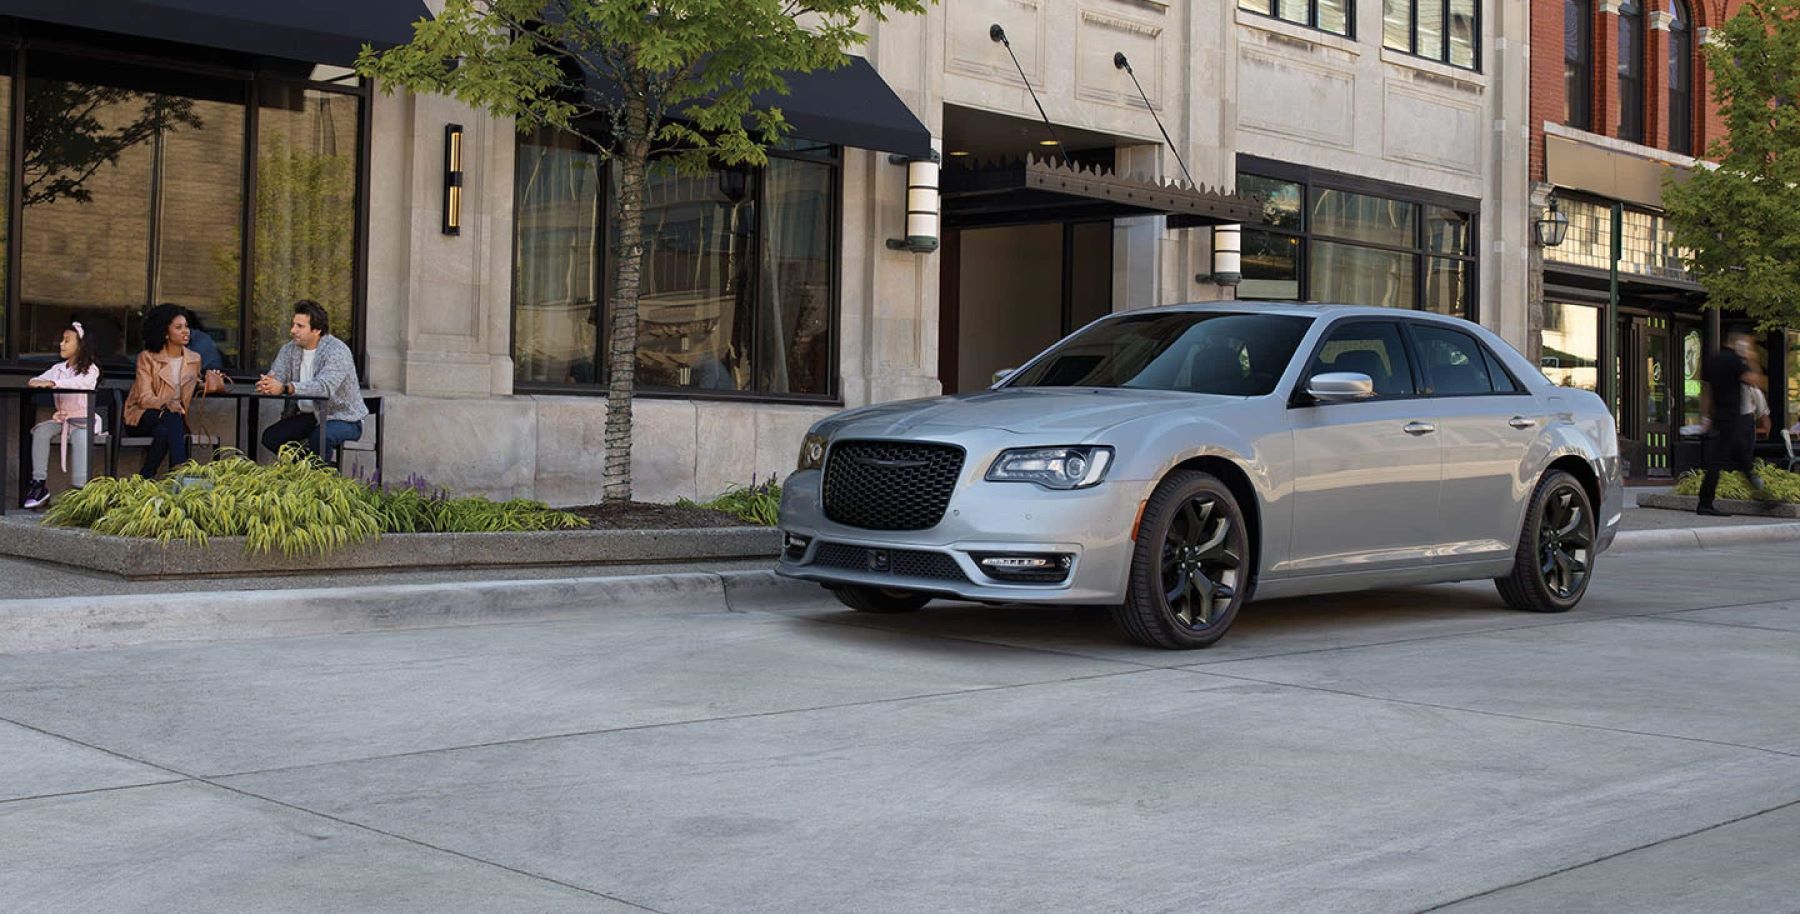 A 2022 Chrysler 300 with a light gray paint color parked on a concrete road near a shopping street and cafe